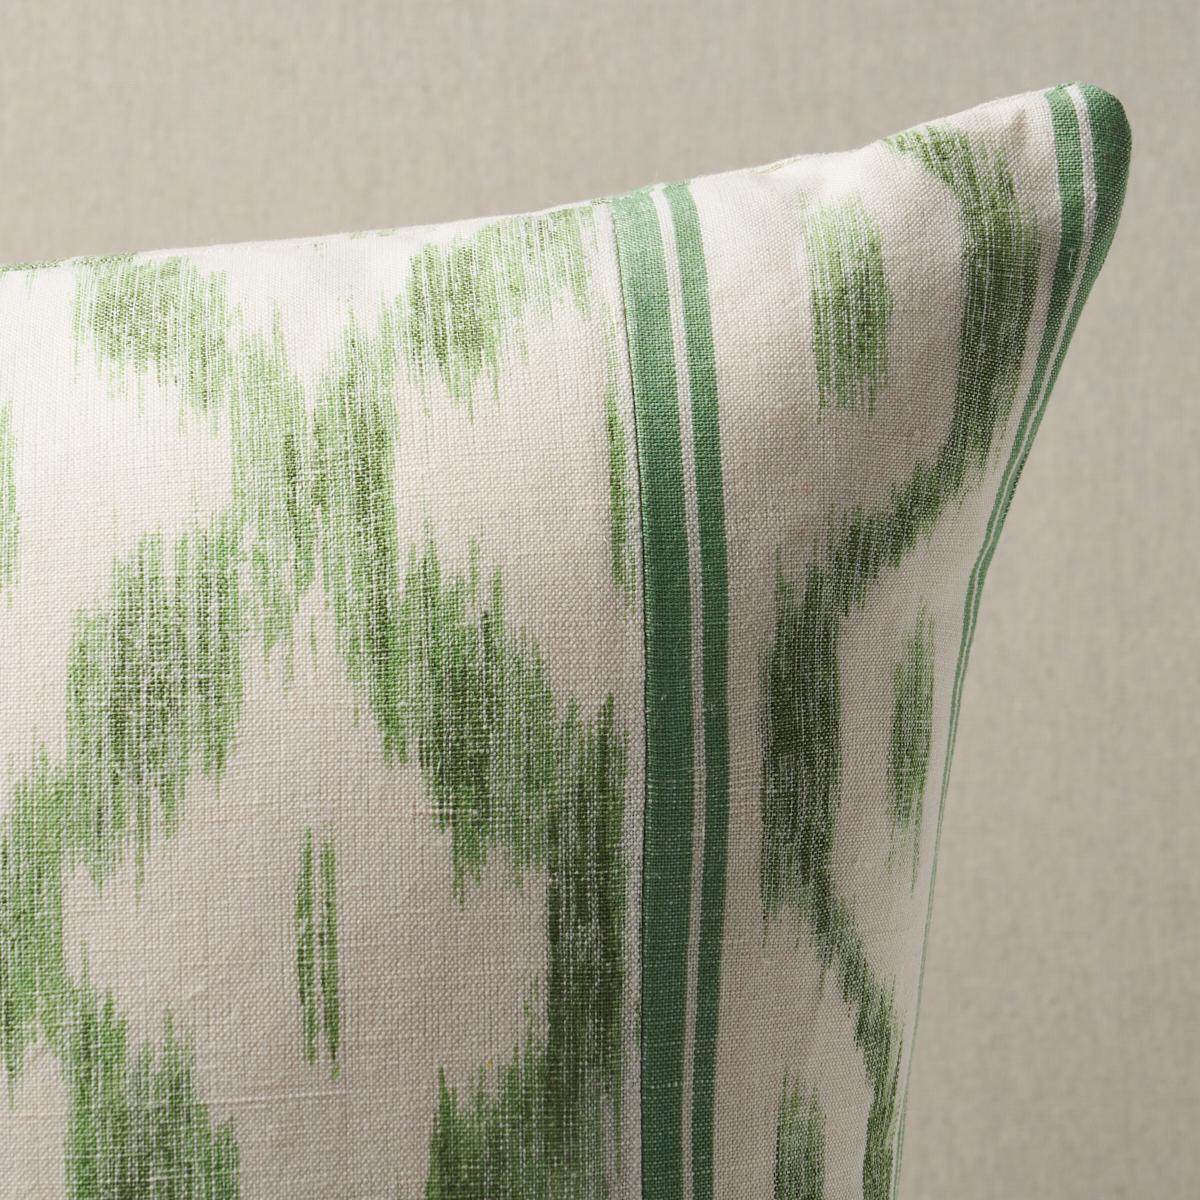 This pillow features Santa Monica Ikat by Mark D. Sikes for Schumacher with a knife edge finish. This artisanally crafted pattern puts a fresh spin on an archival ikat. Pillow includes a feather/down fill insert and hidden zipper closure.
